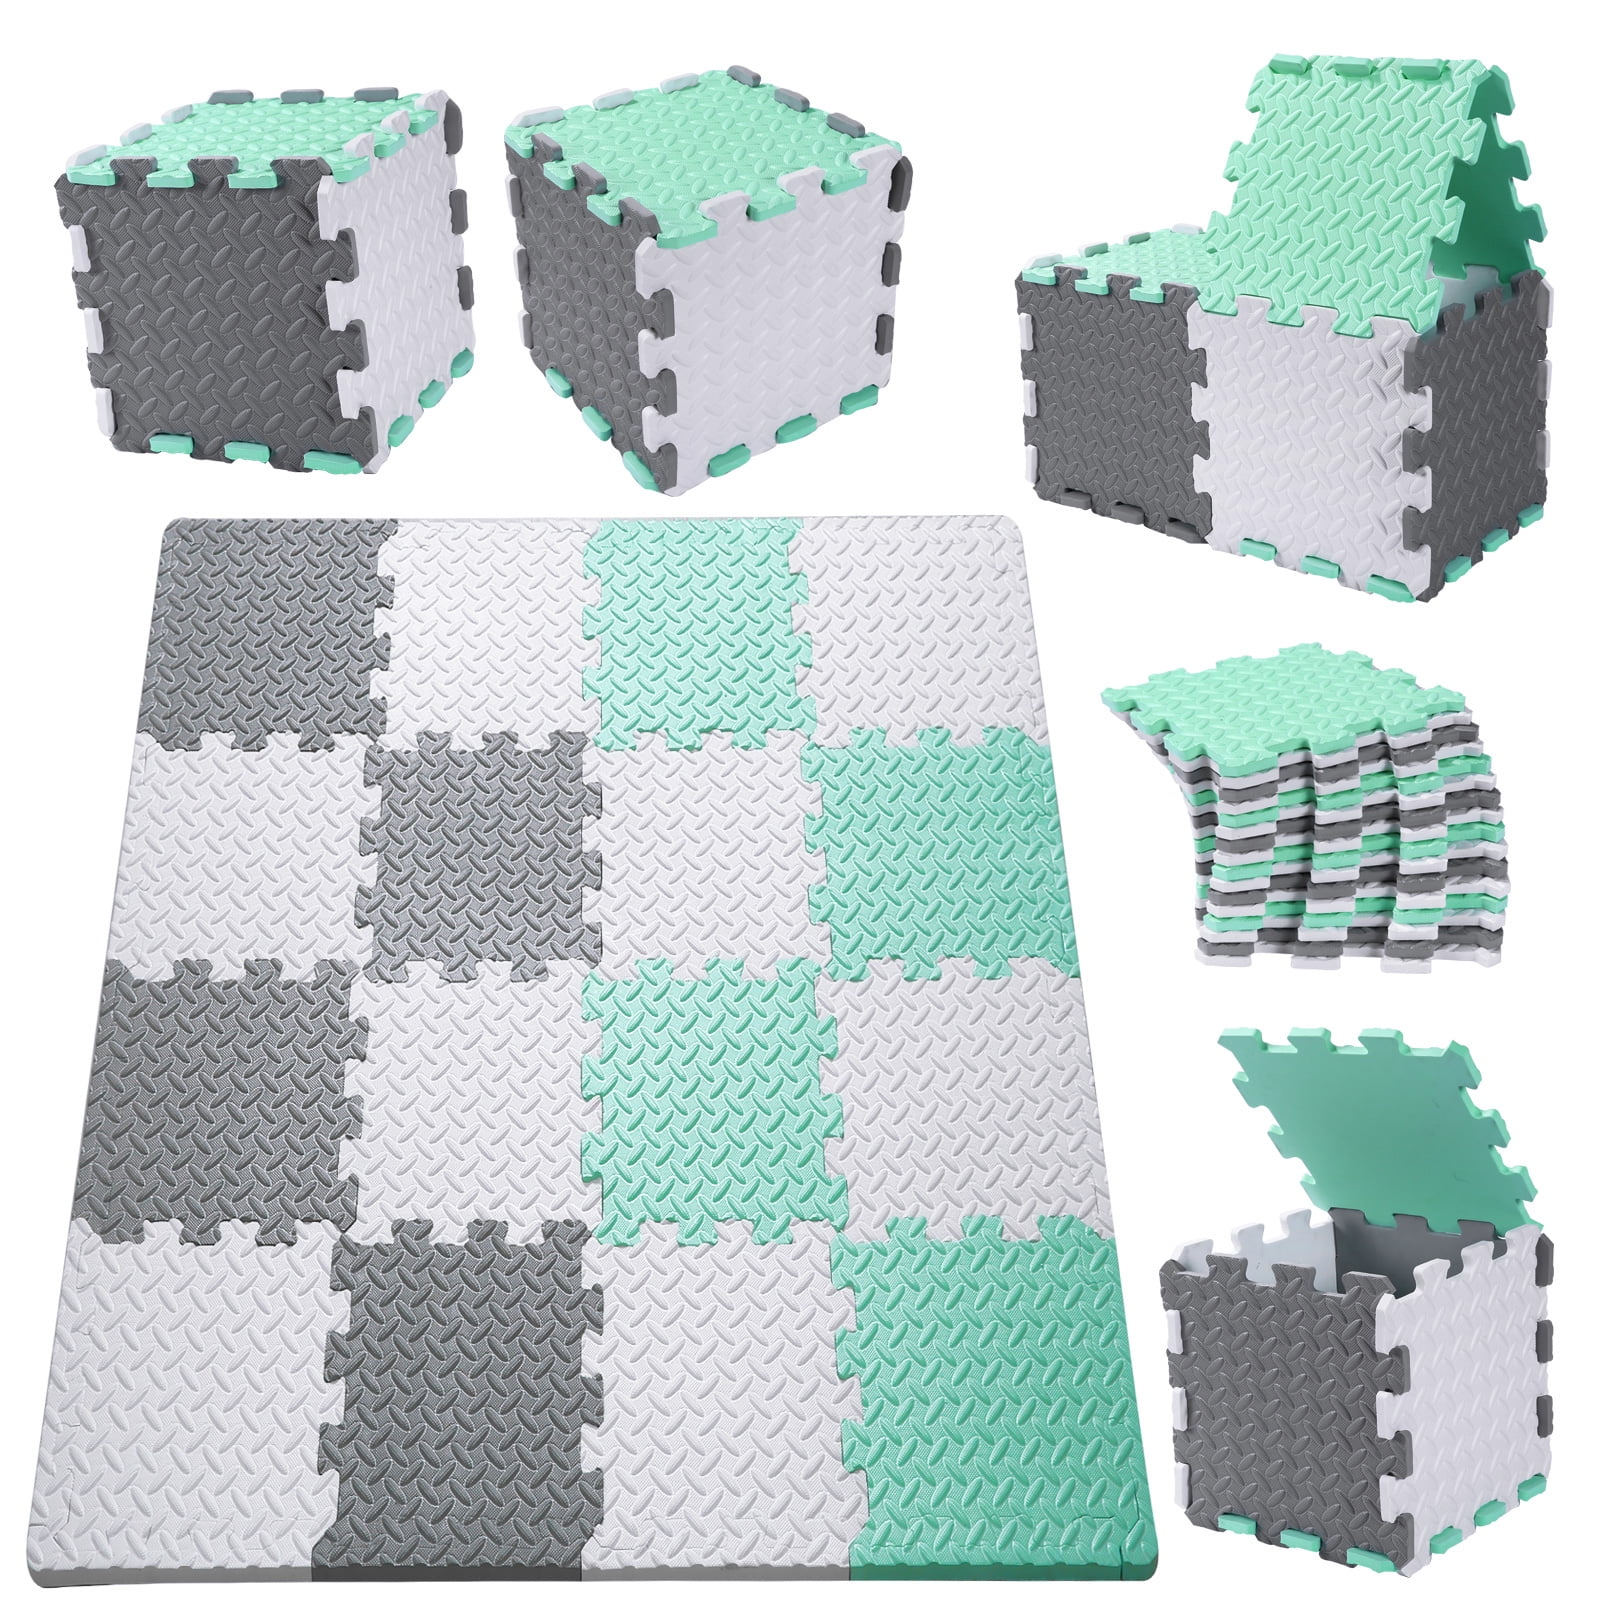 0.47 Inch Thickened Interlocking Foam Puzzle Tile Exercise Mats Floor Mats Foam Play Mats Jigsaw Mat Baby Child Rug Crawl Mat with Storage Bag Tamiplay 16Pcs Foam Baby Play Mat White/Gray/Blue 